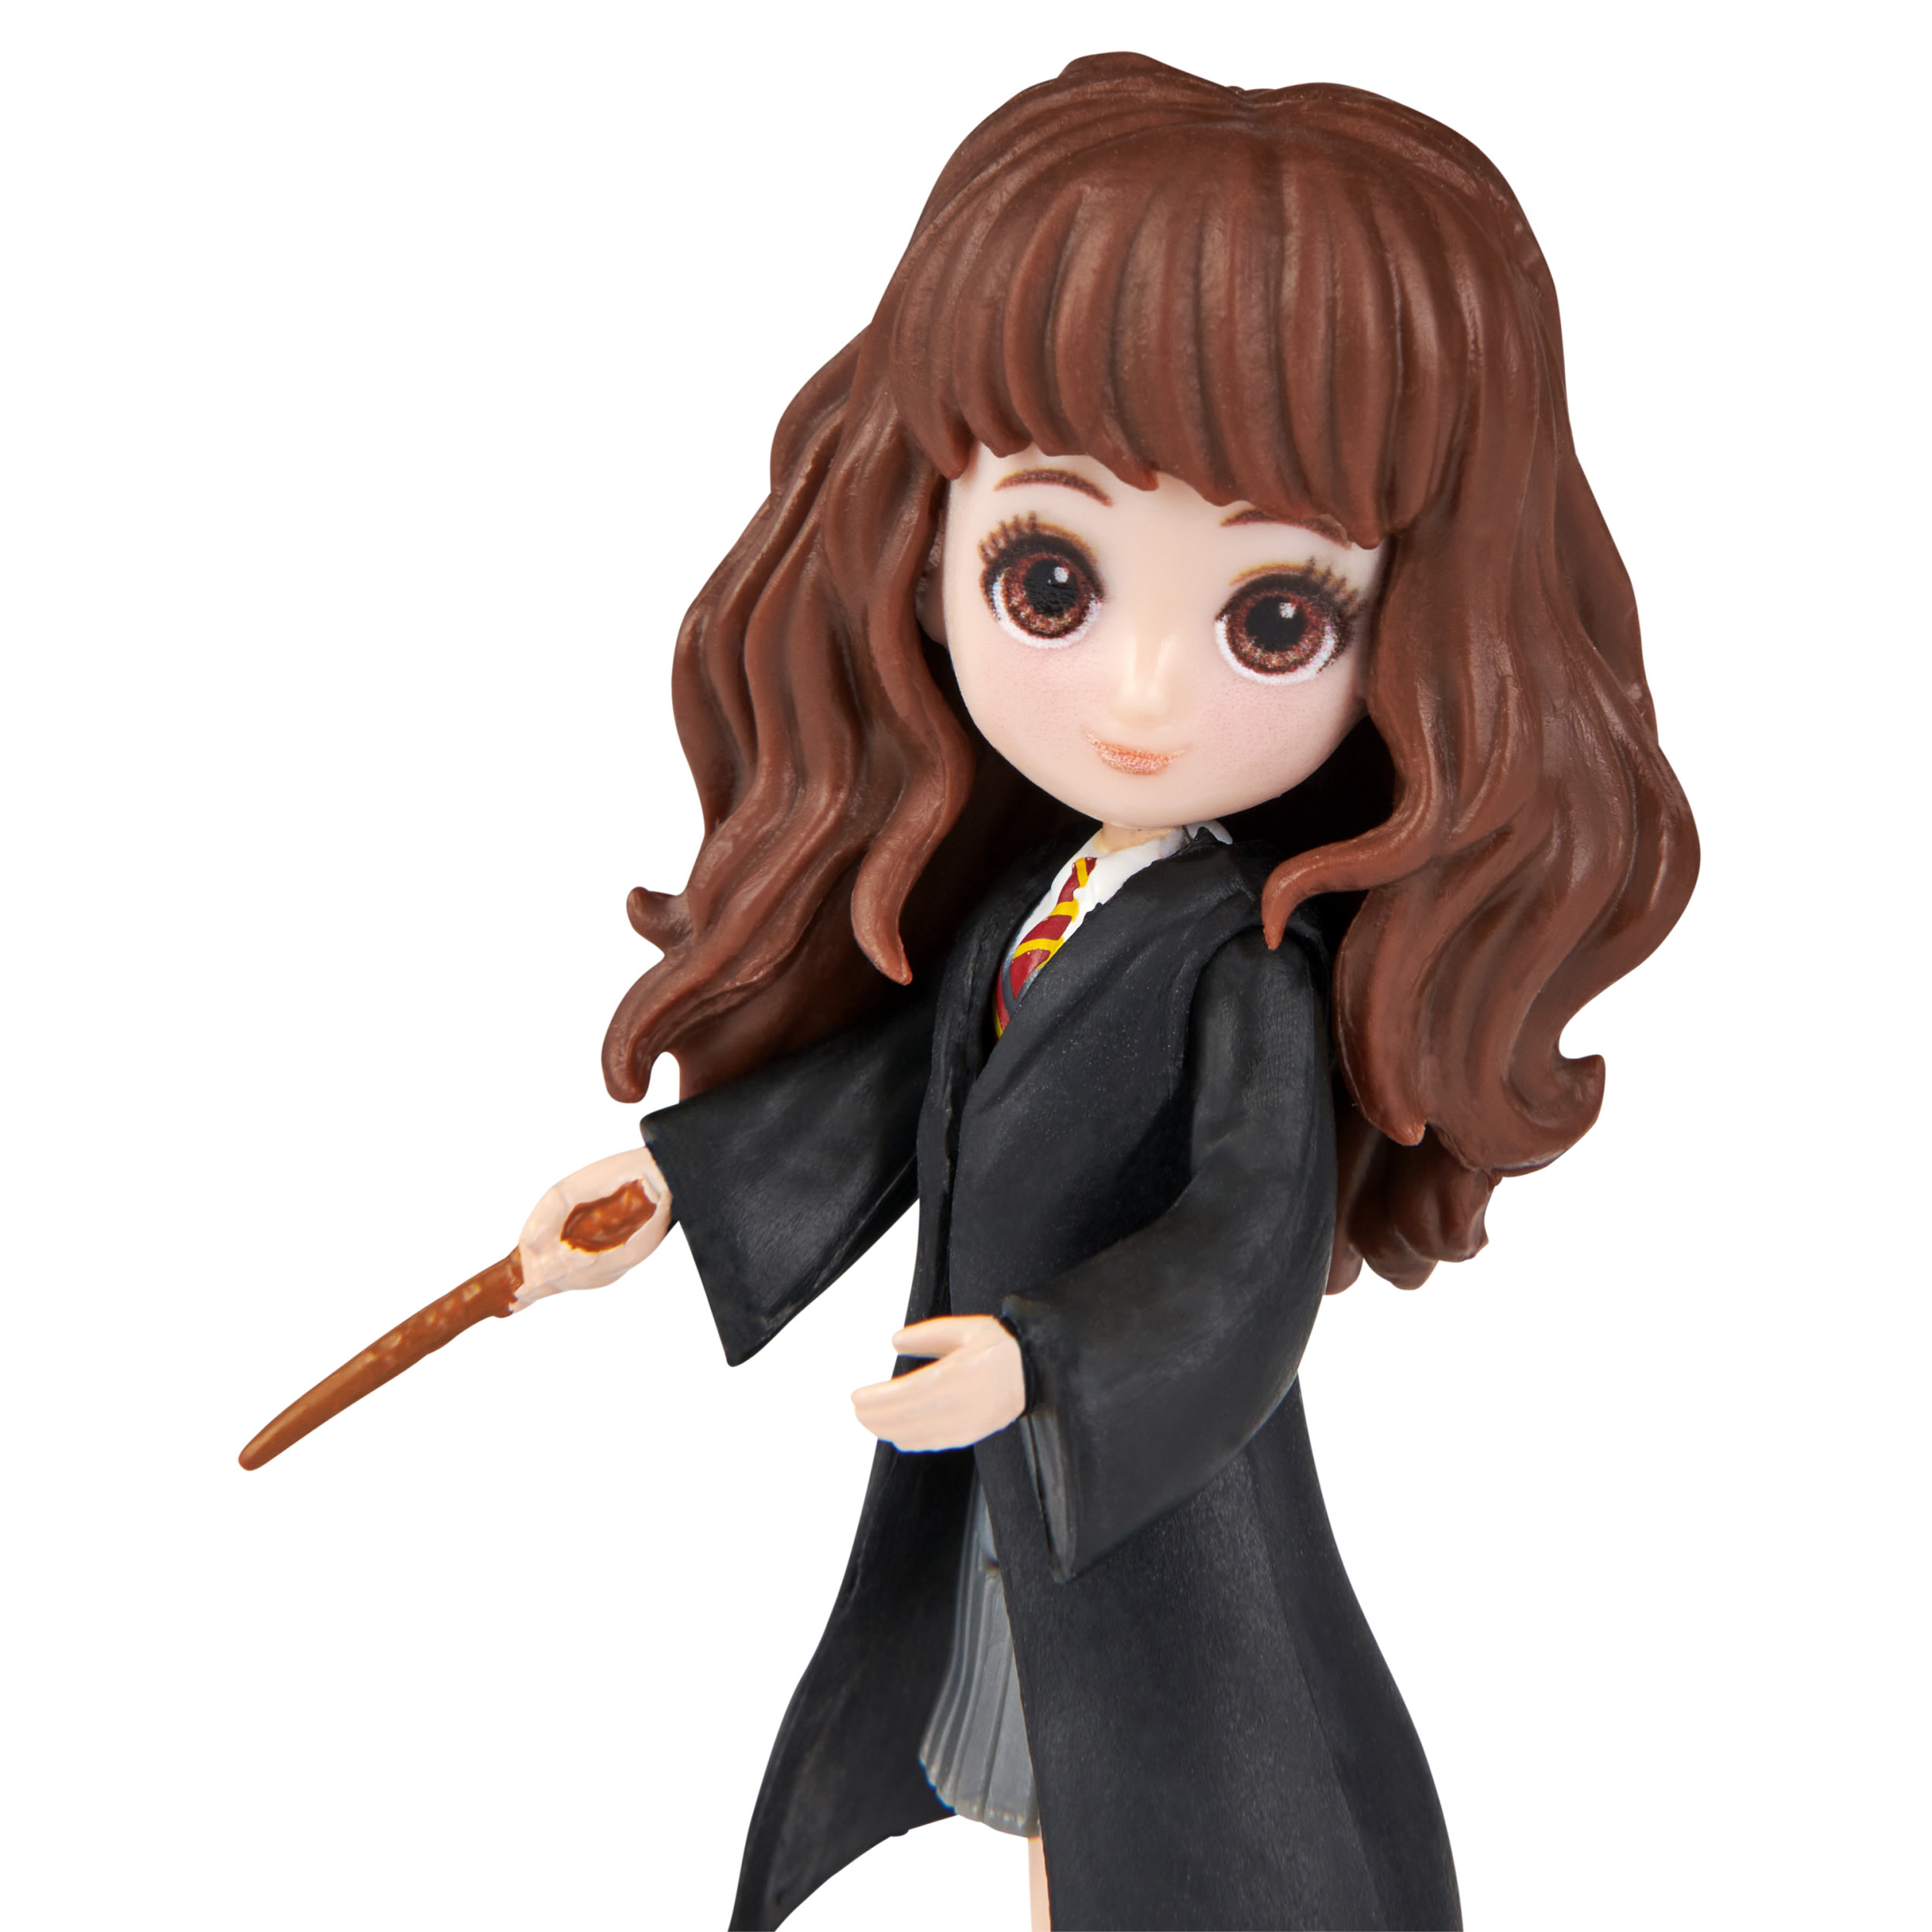 SPIN MASTER - Wizarding World Harry Potter, Magical Minis Collectible 3-inch Hermione Granger Figure, Kids Toys for Ages 5 and up